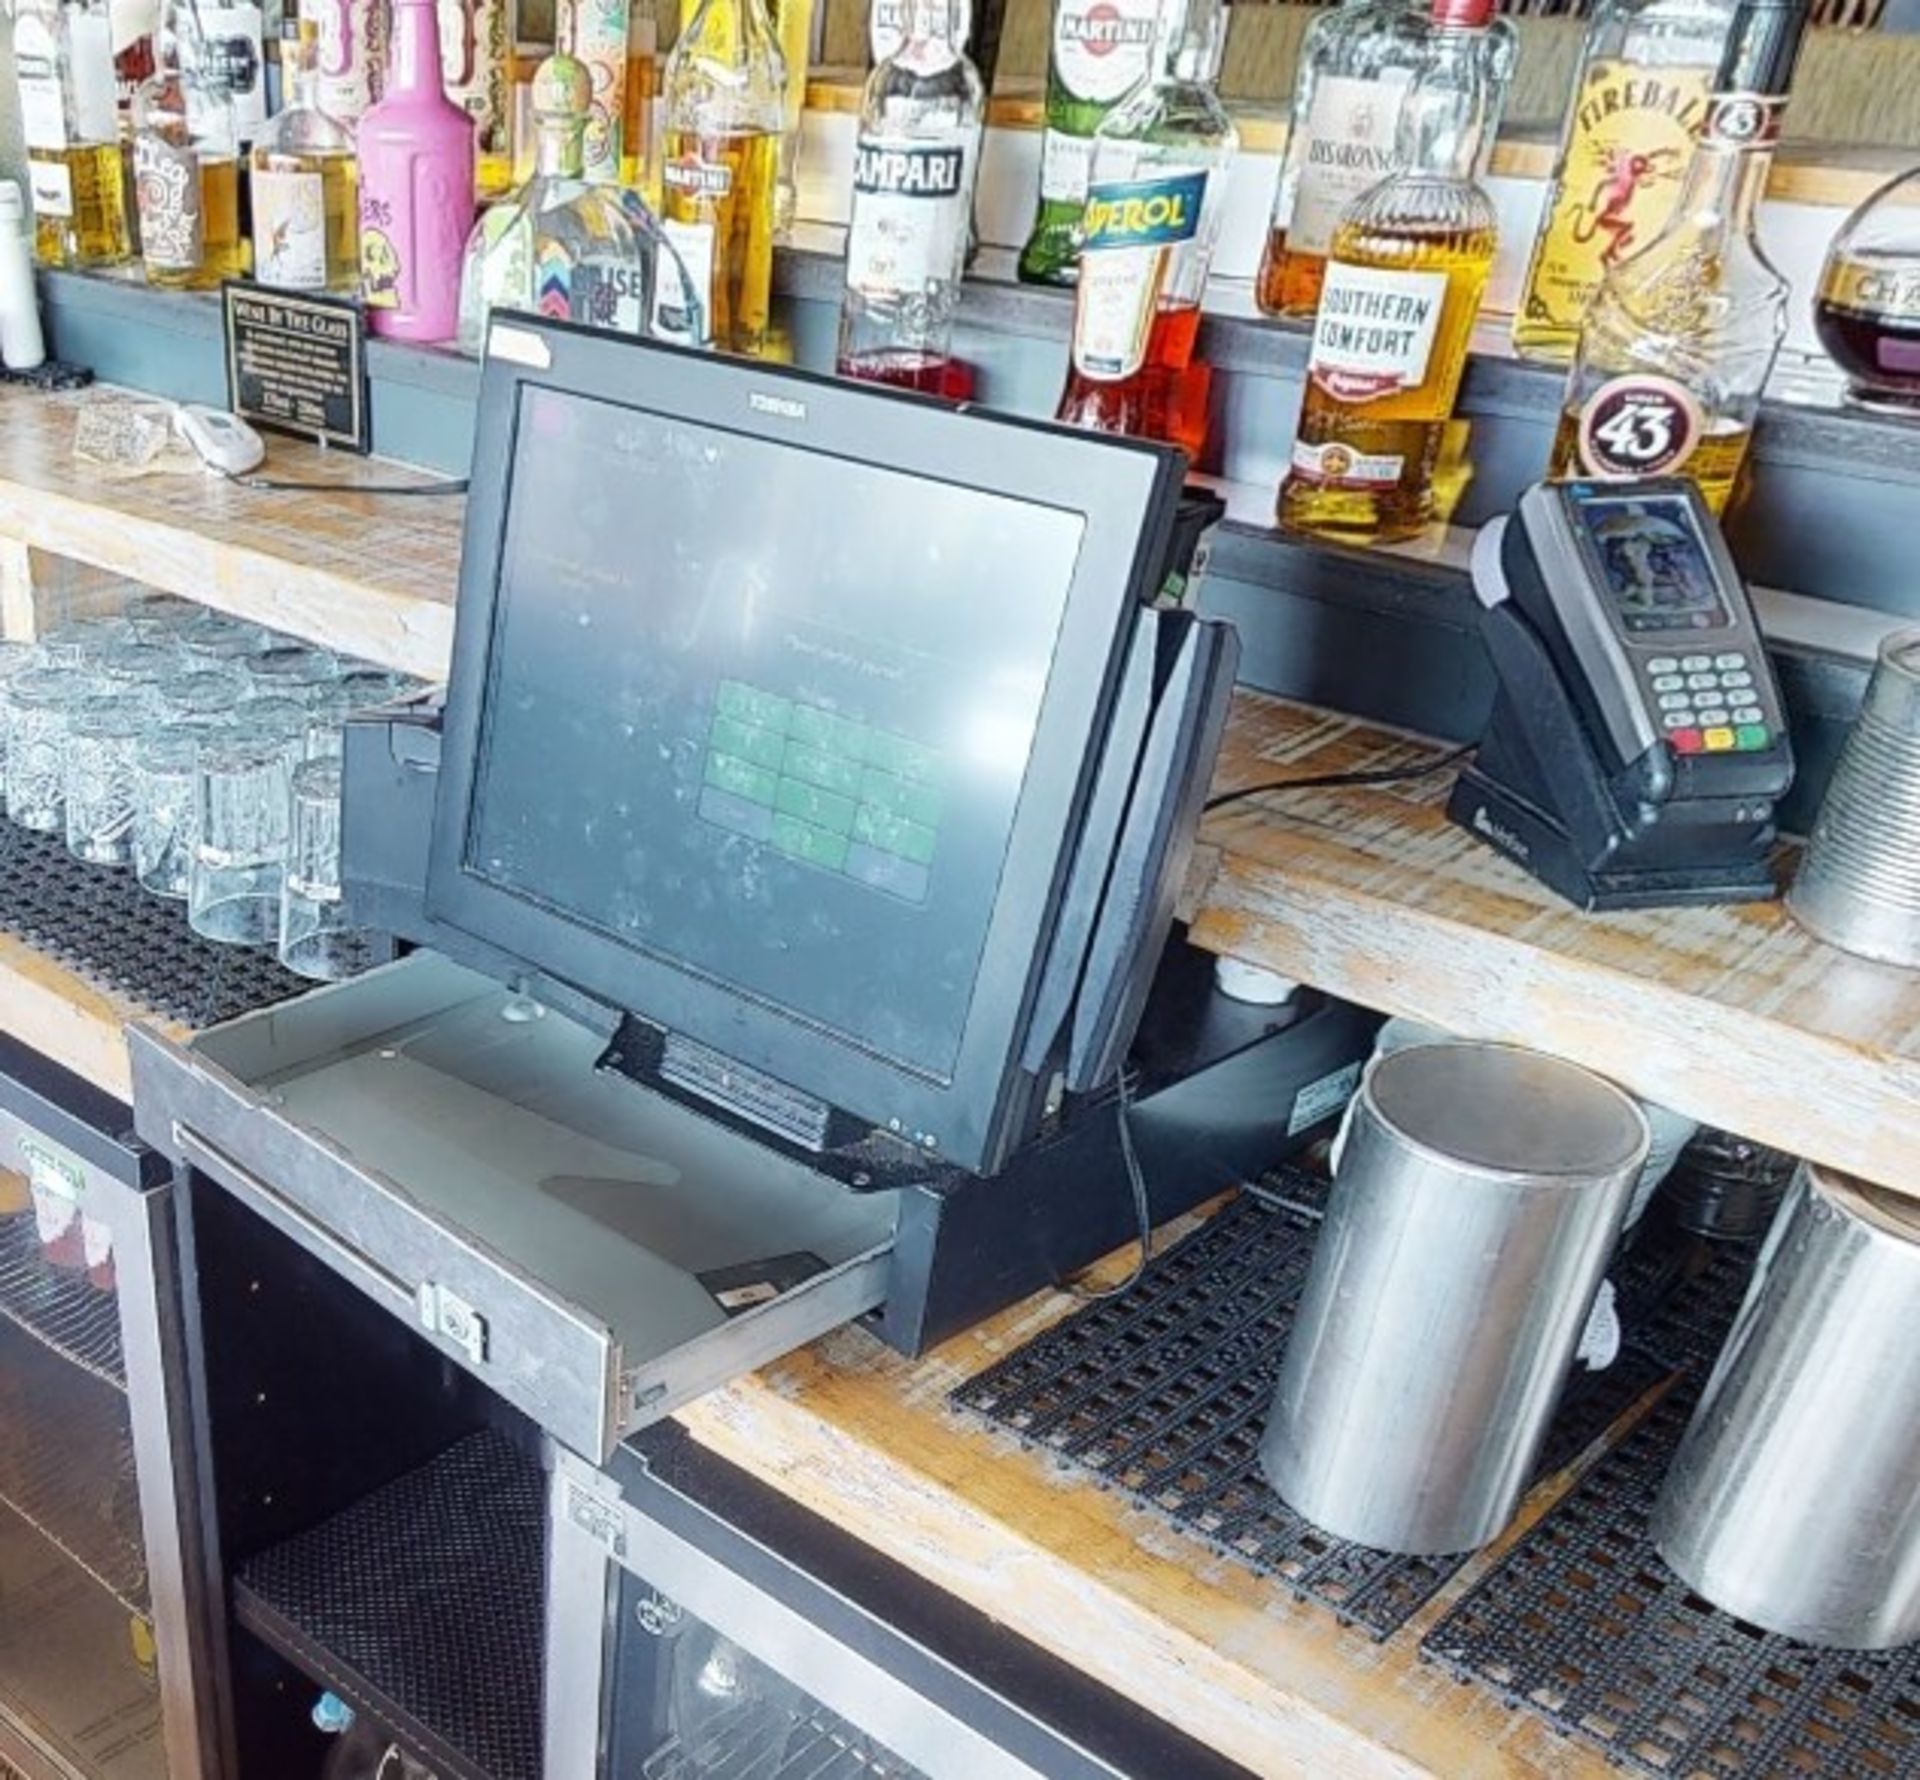 1 x Toshiba EPOS System With Payment Terminal, Cash Drawer and Receipt Printer - Image 2 of 3